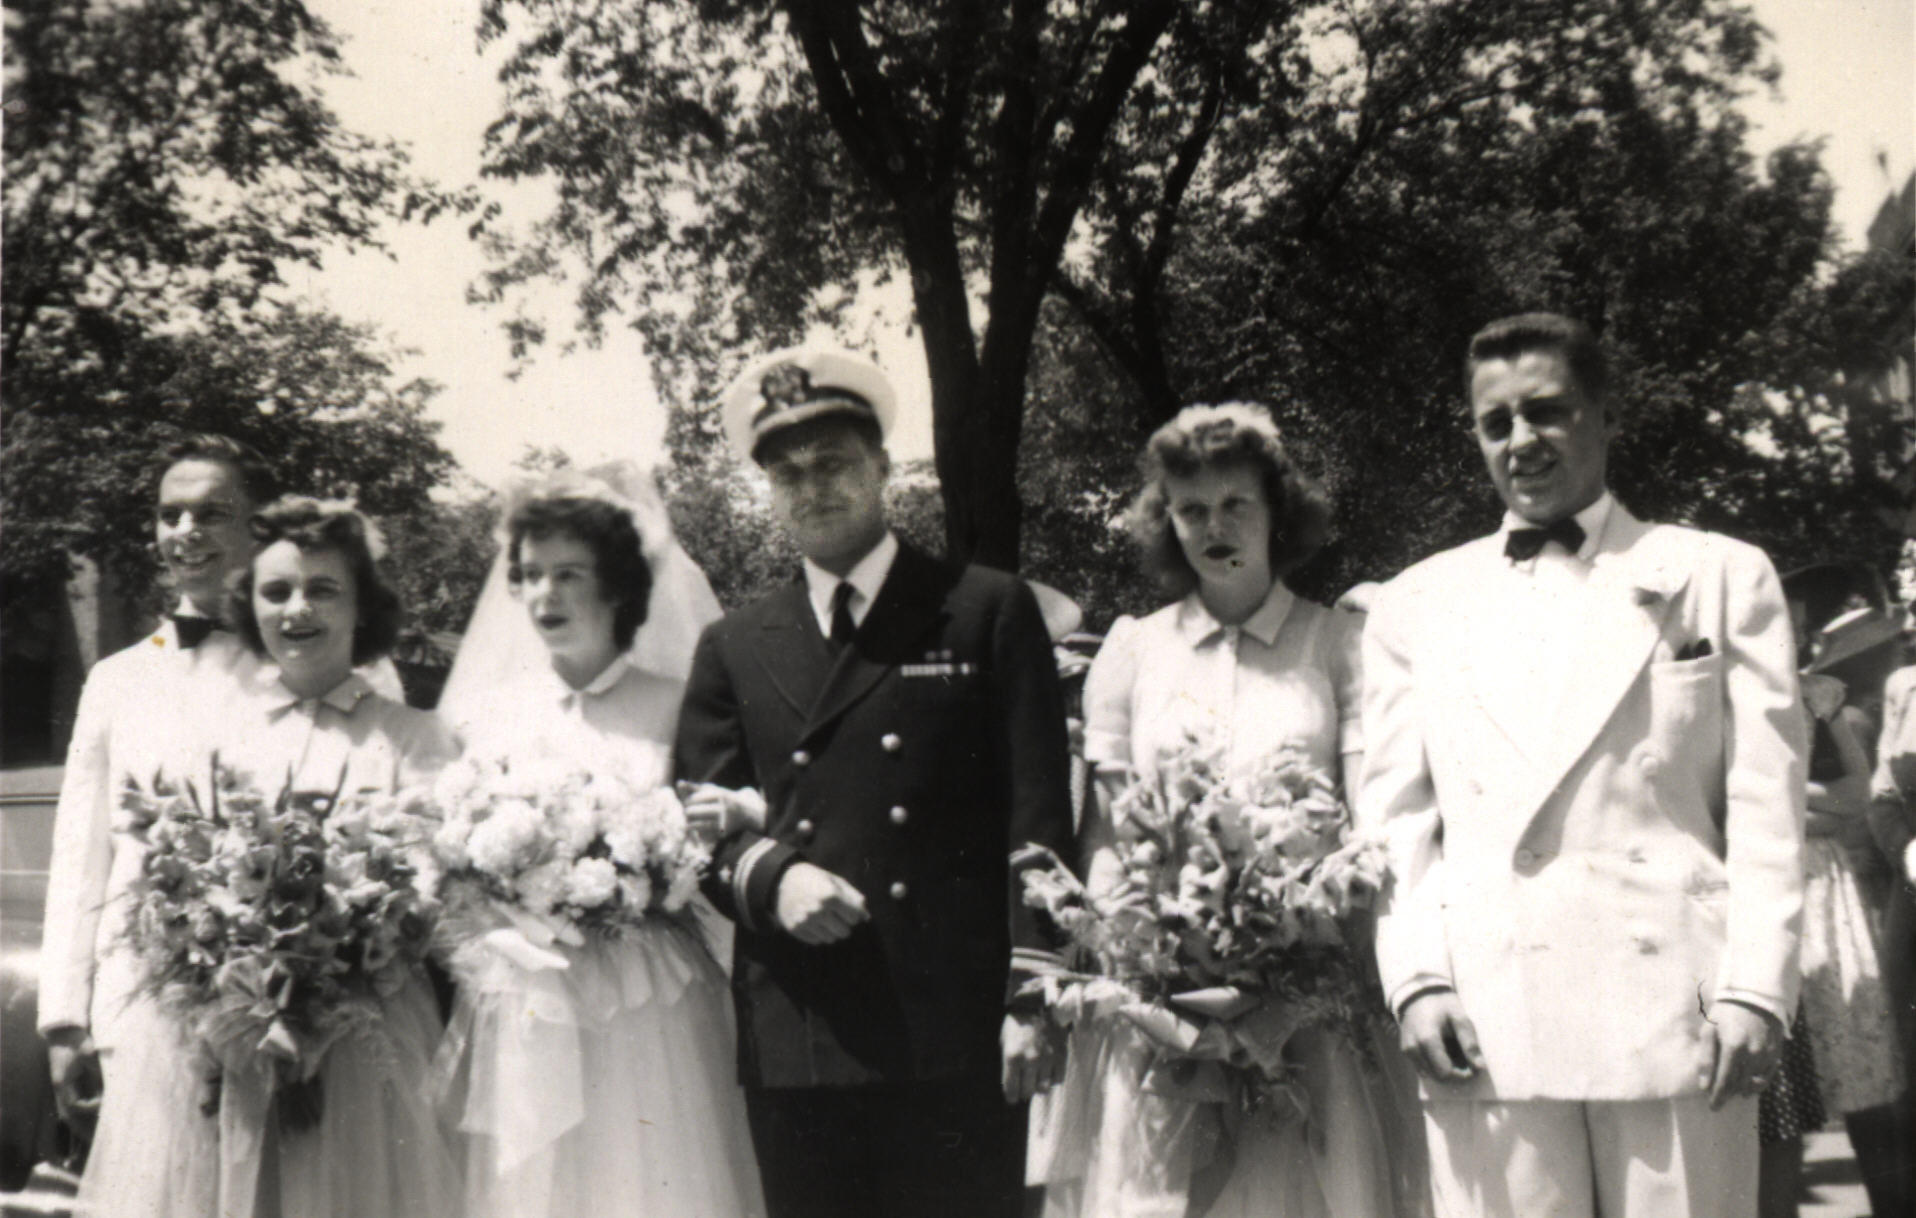 U.S. Navy Lieutenant J.G. Robert James Bach (my father) who served from 1944-1946 pictured center at his wedding.